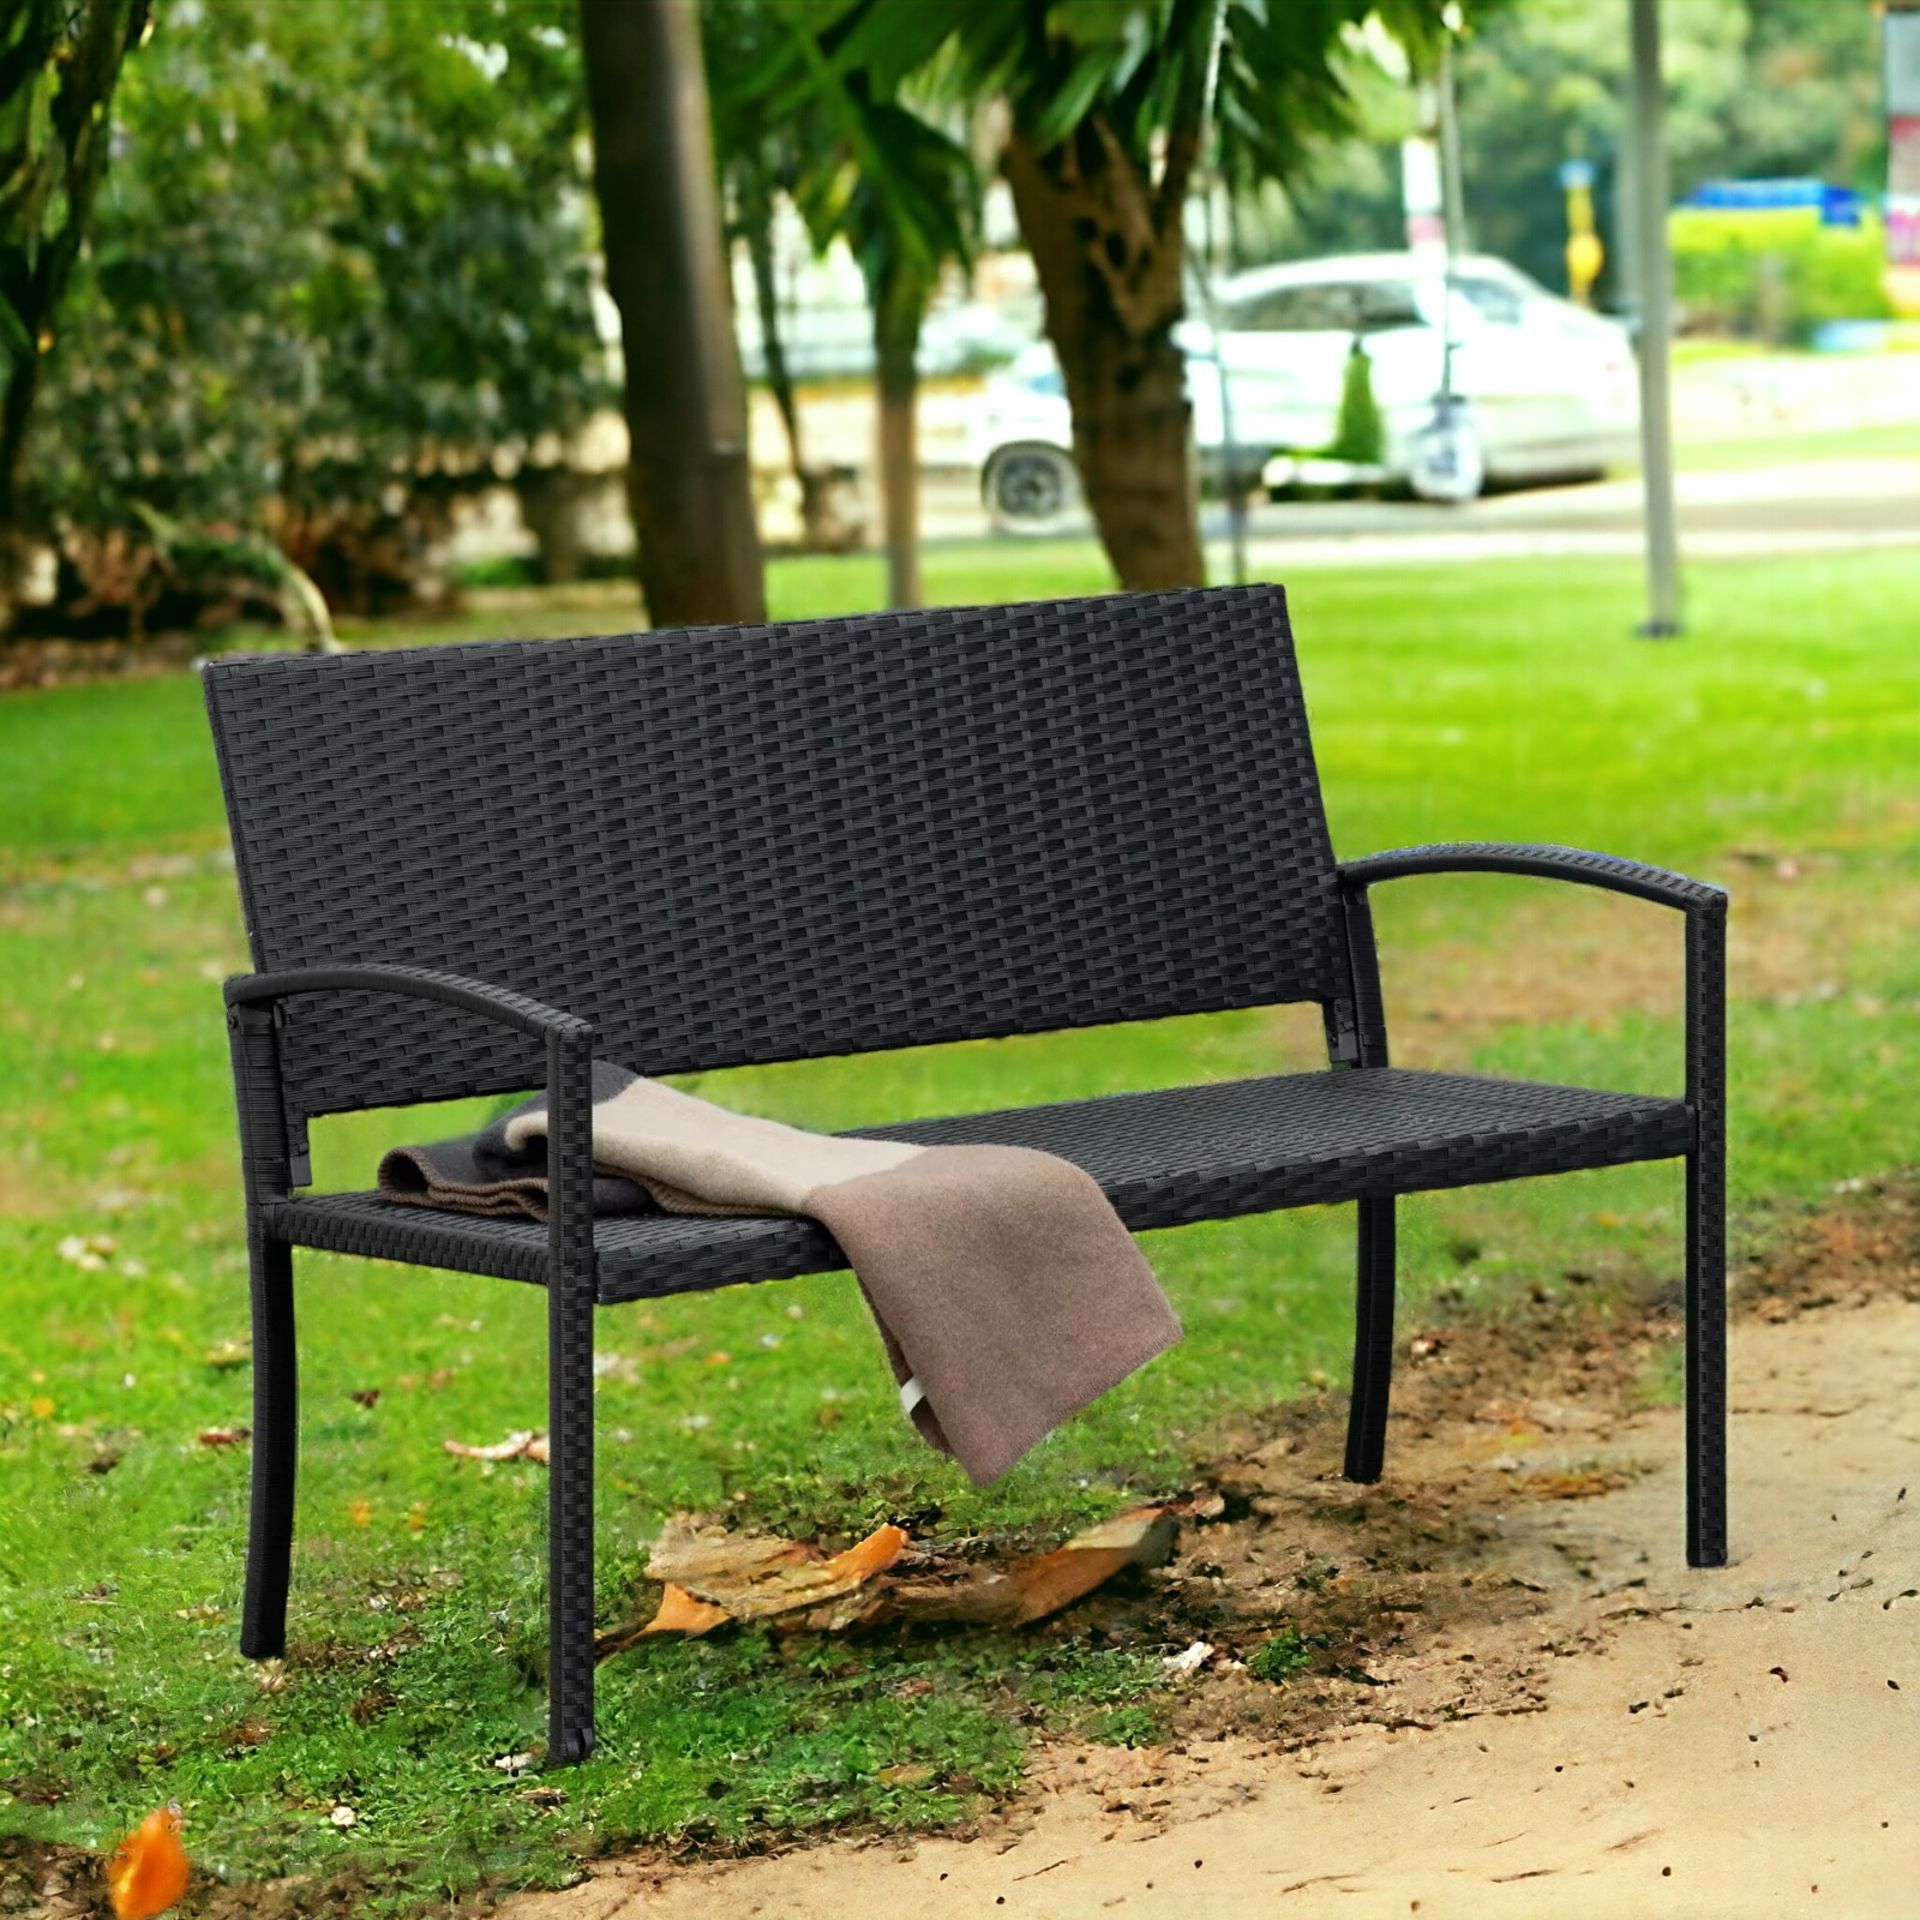 FREE DELIVERY- STYLISH PATIO RATTAN 2 SEATER LOVE SEAT GARDEN BENCH IN BLACK - Image 2 of 3